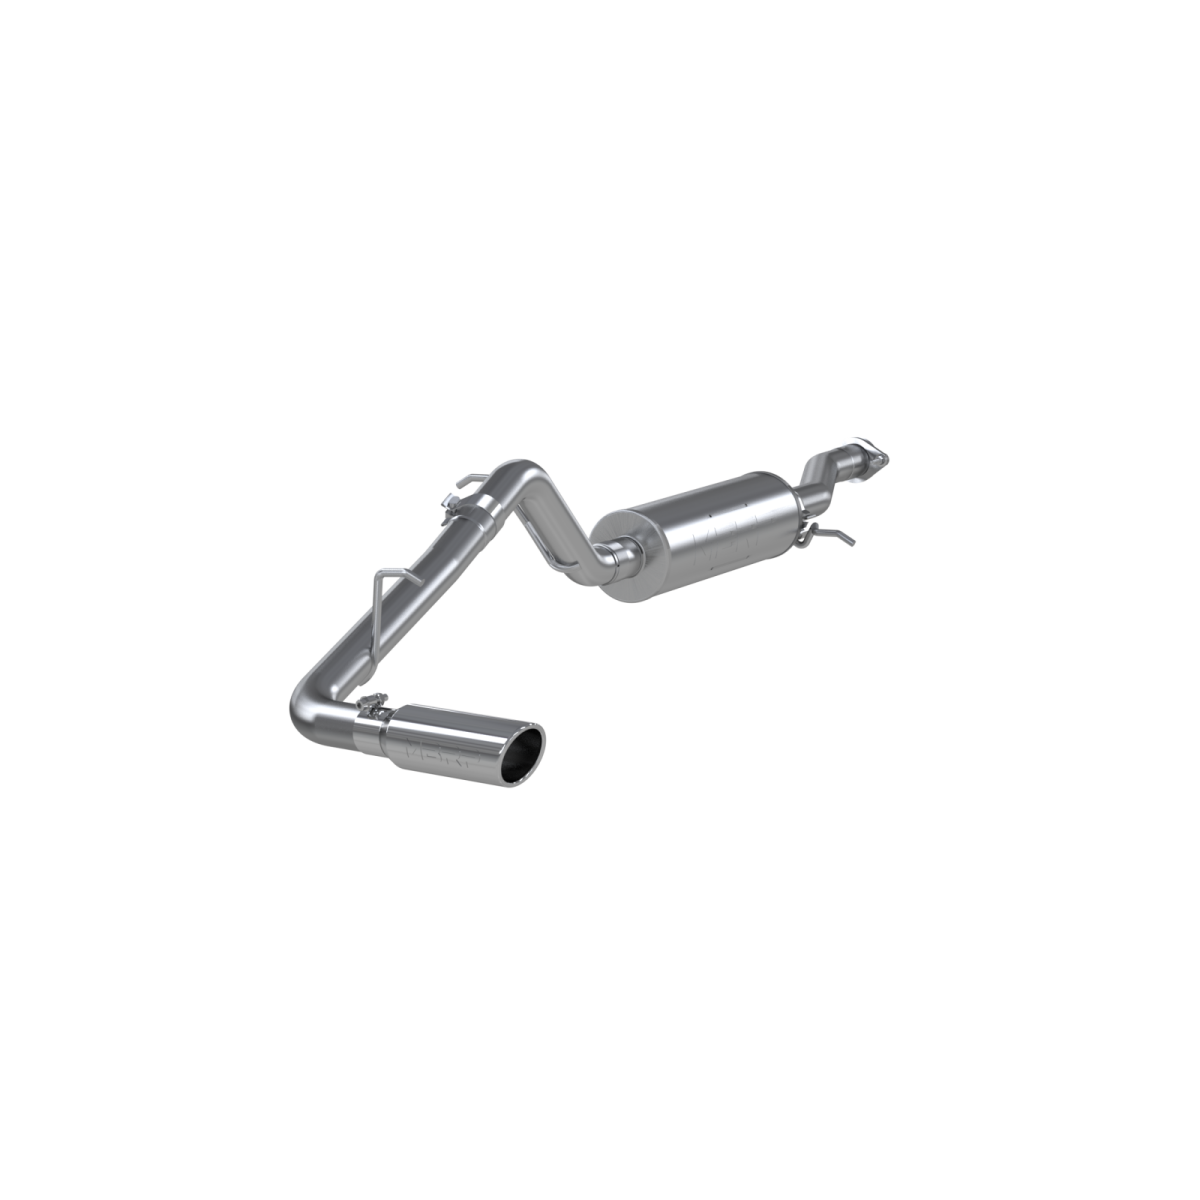 MBRP - MBRP Cat Back Exhaust System Single Side 3.5 Inch Tip Aluminized Steel For 04-12 Colorado/Canyon 2.8/2.9/3.5/3.7L Extended Cab/Crew Cab Short Bed S5046AL